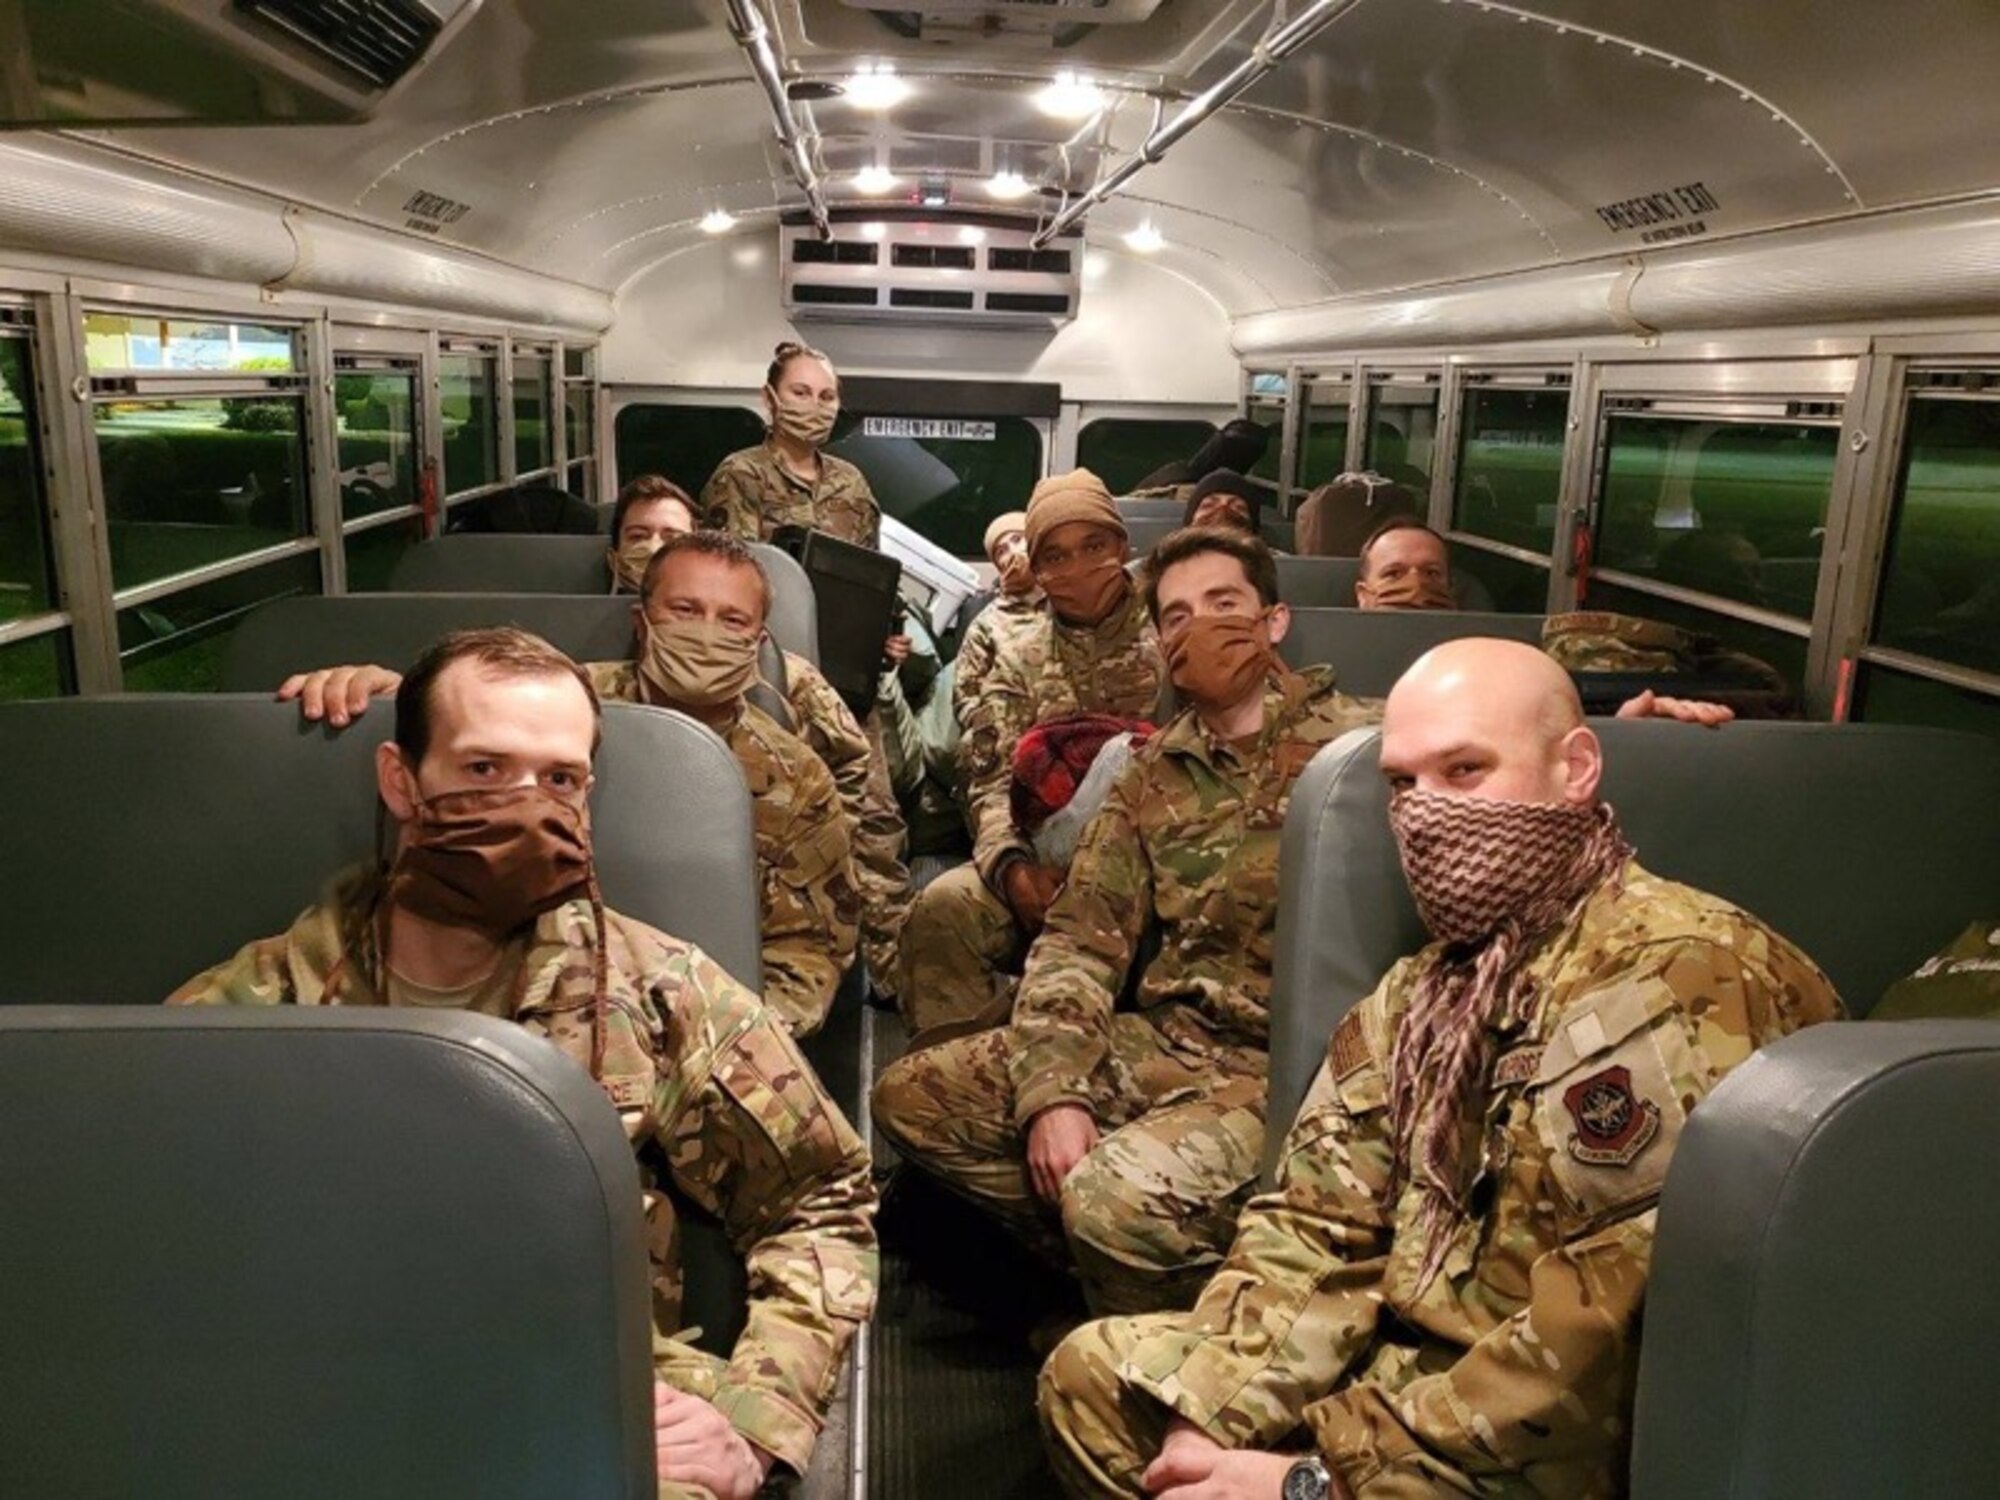 Members of the 22nd Airlift Squadron wear face masks April 11, 2020, during a deployment to Germany. The masks were made by Jenn Taylor, a military spouse who sewed more than 325 masks in April for the Travis Air Force Base, California, community. Taylor’s husband, Tech. Sgt. Adam Taylor, a Travis AFB Airman, is on a yearlong deployment to Incirlik Air Base, Turkey. (Courtesy photo)